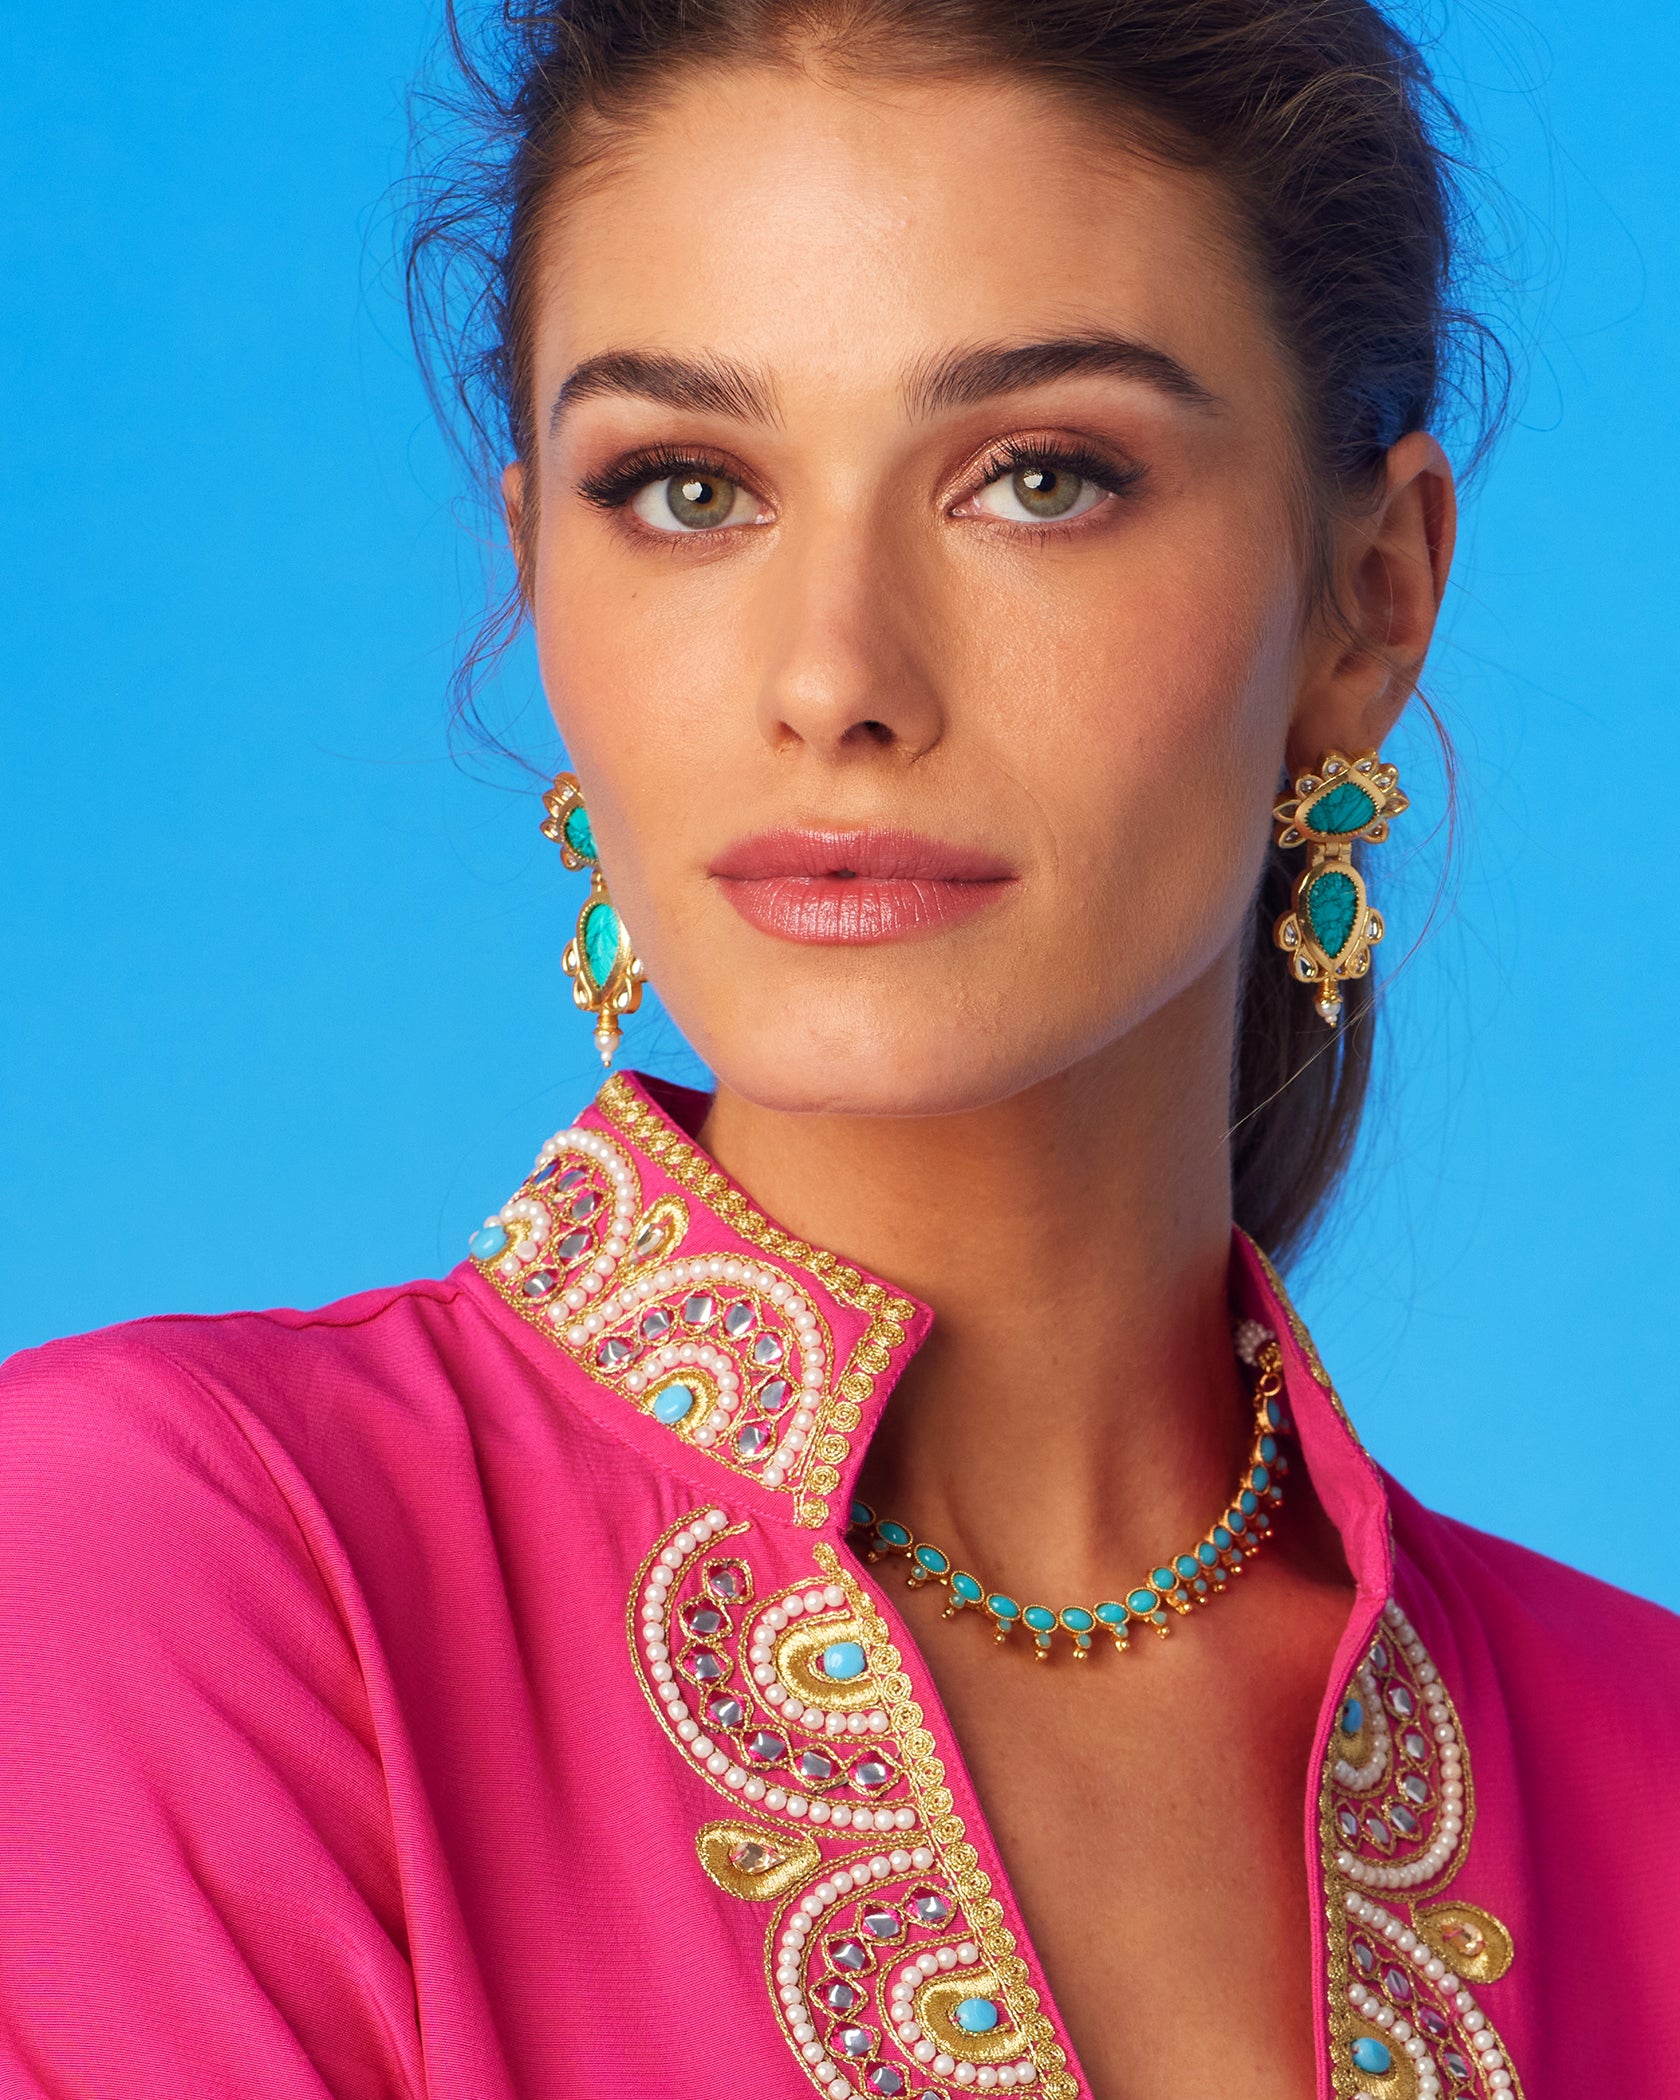 Cora Turquoise Blue String Necklace-Worn with the Noor Pink Dress